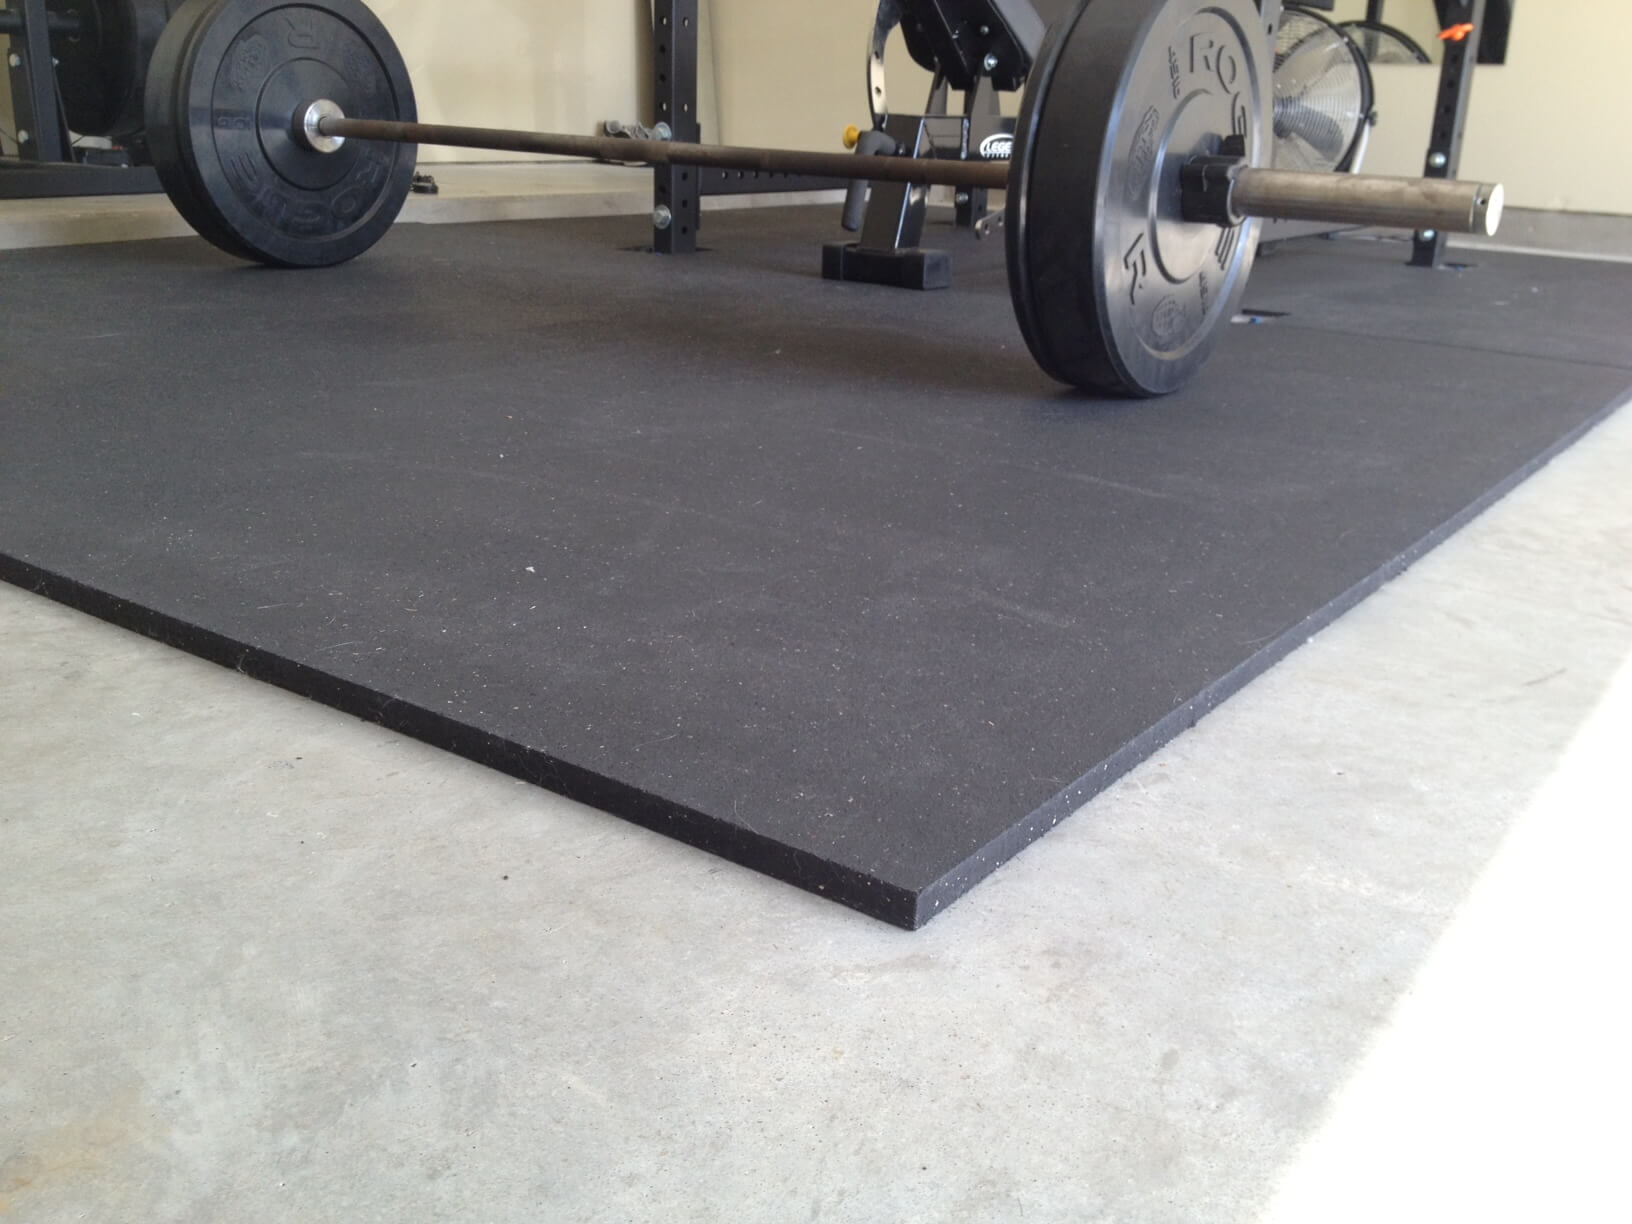 Home Gym Flooring Safety Rubber Mat